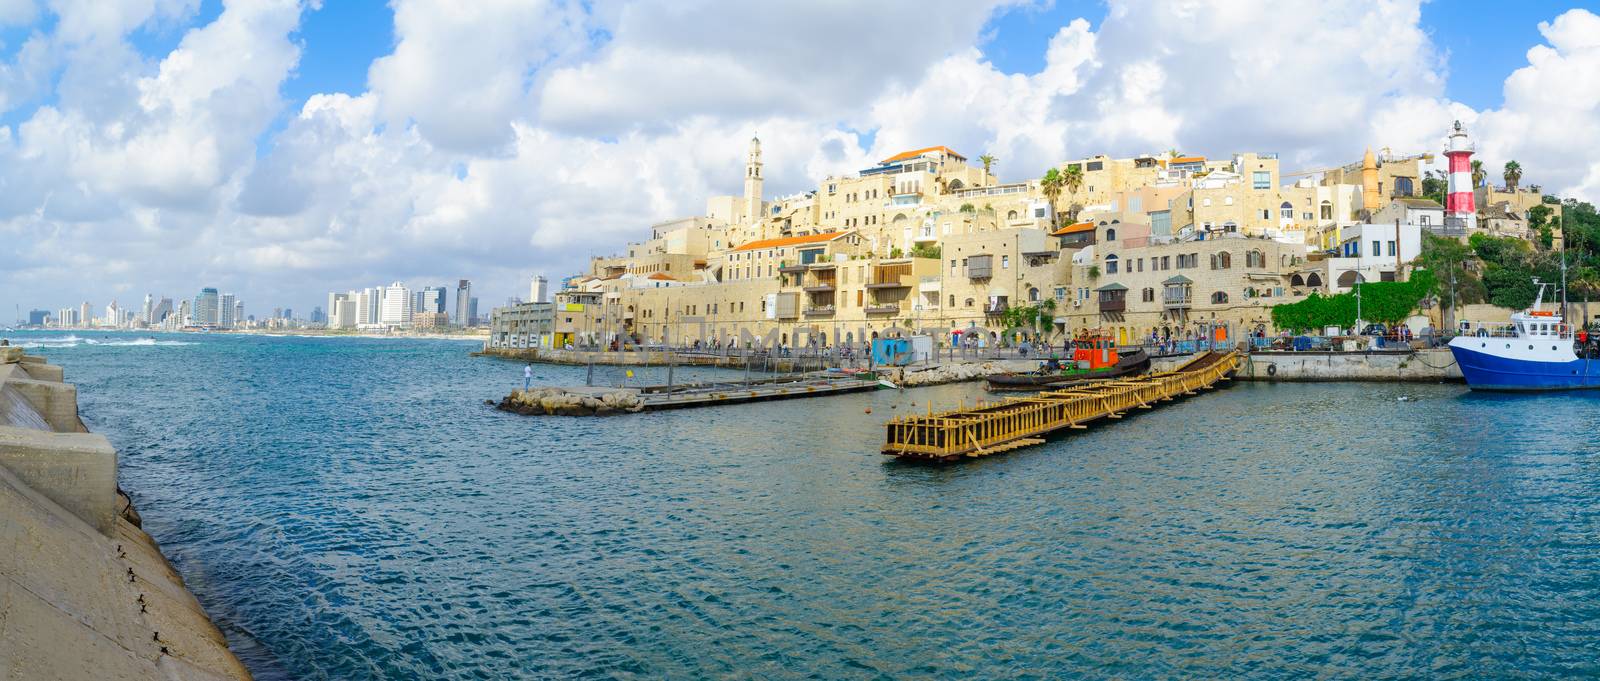 Jaffa port and of the old city of Jaffa by RnDmS